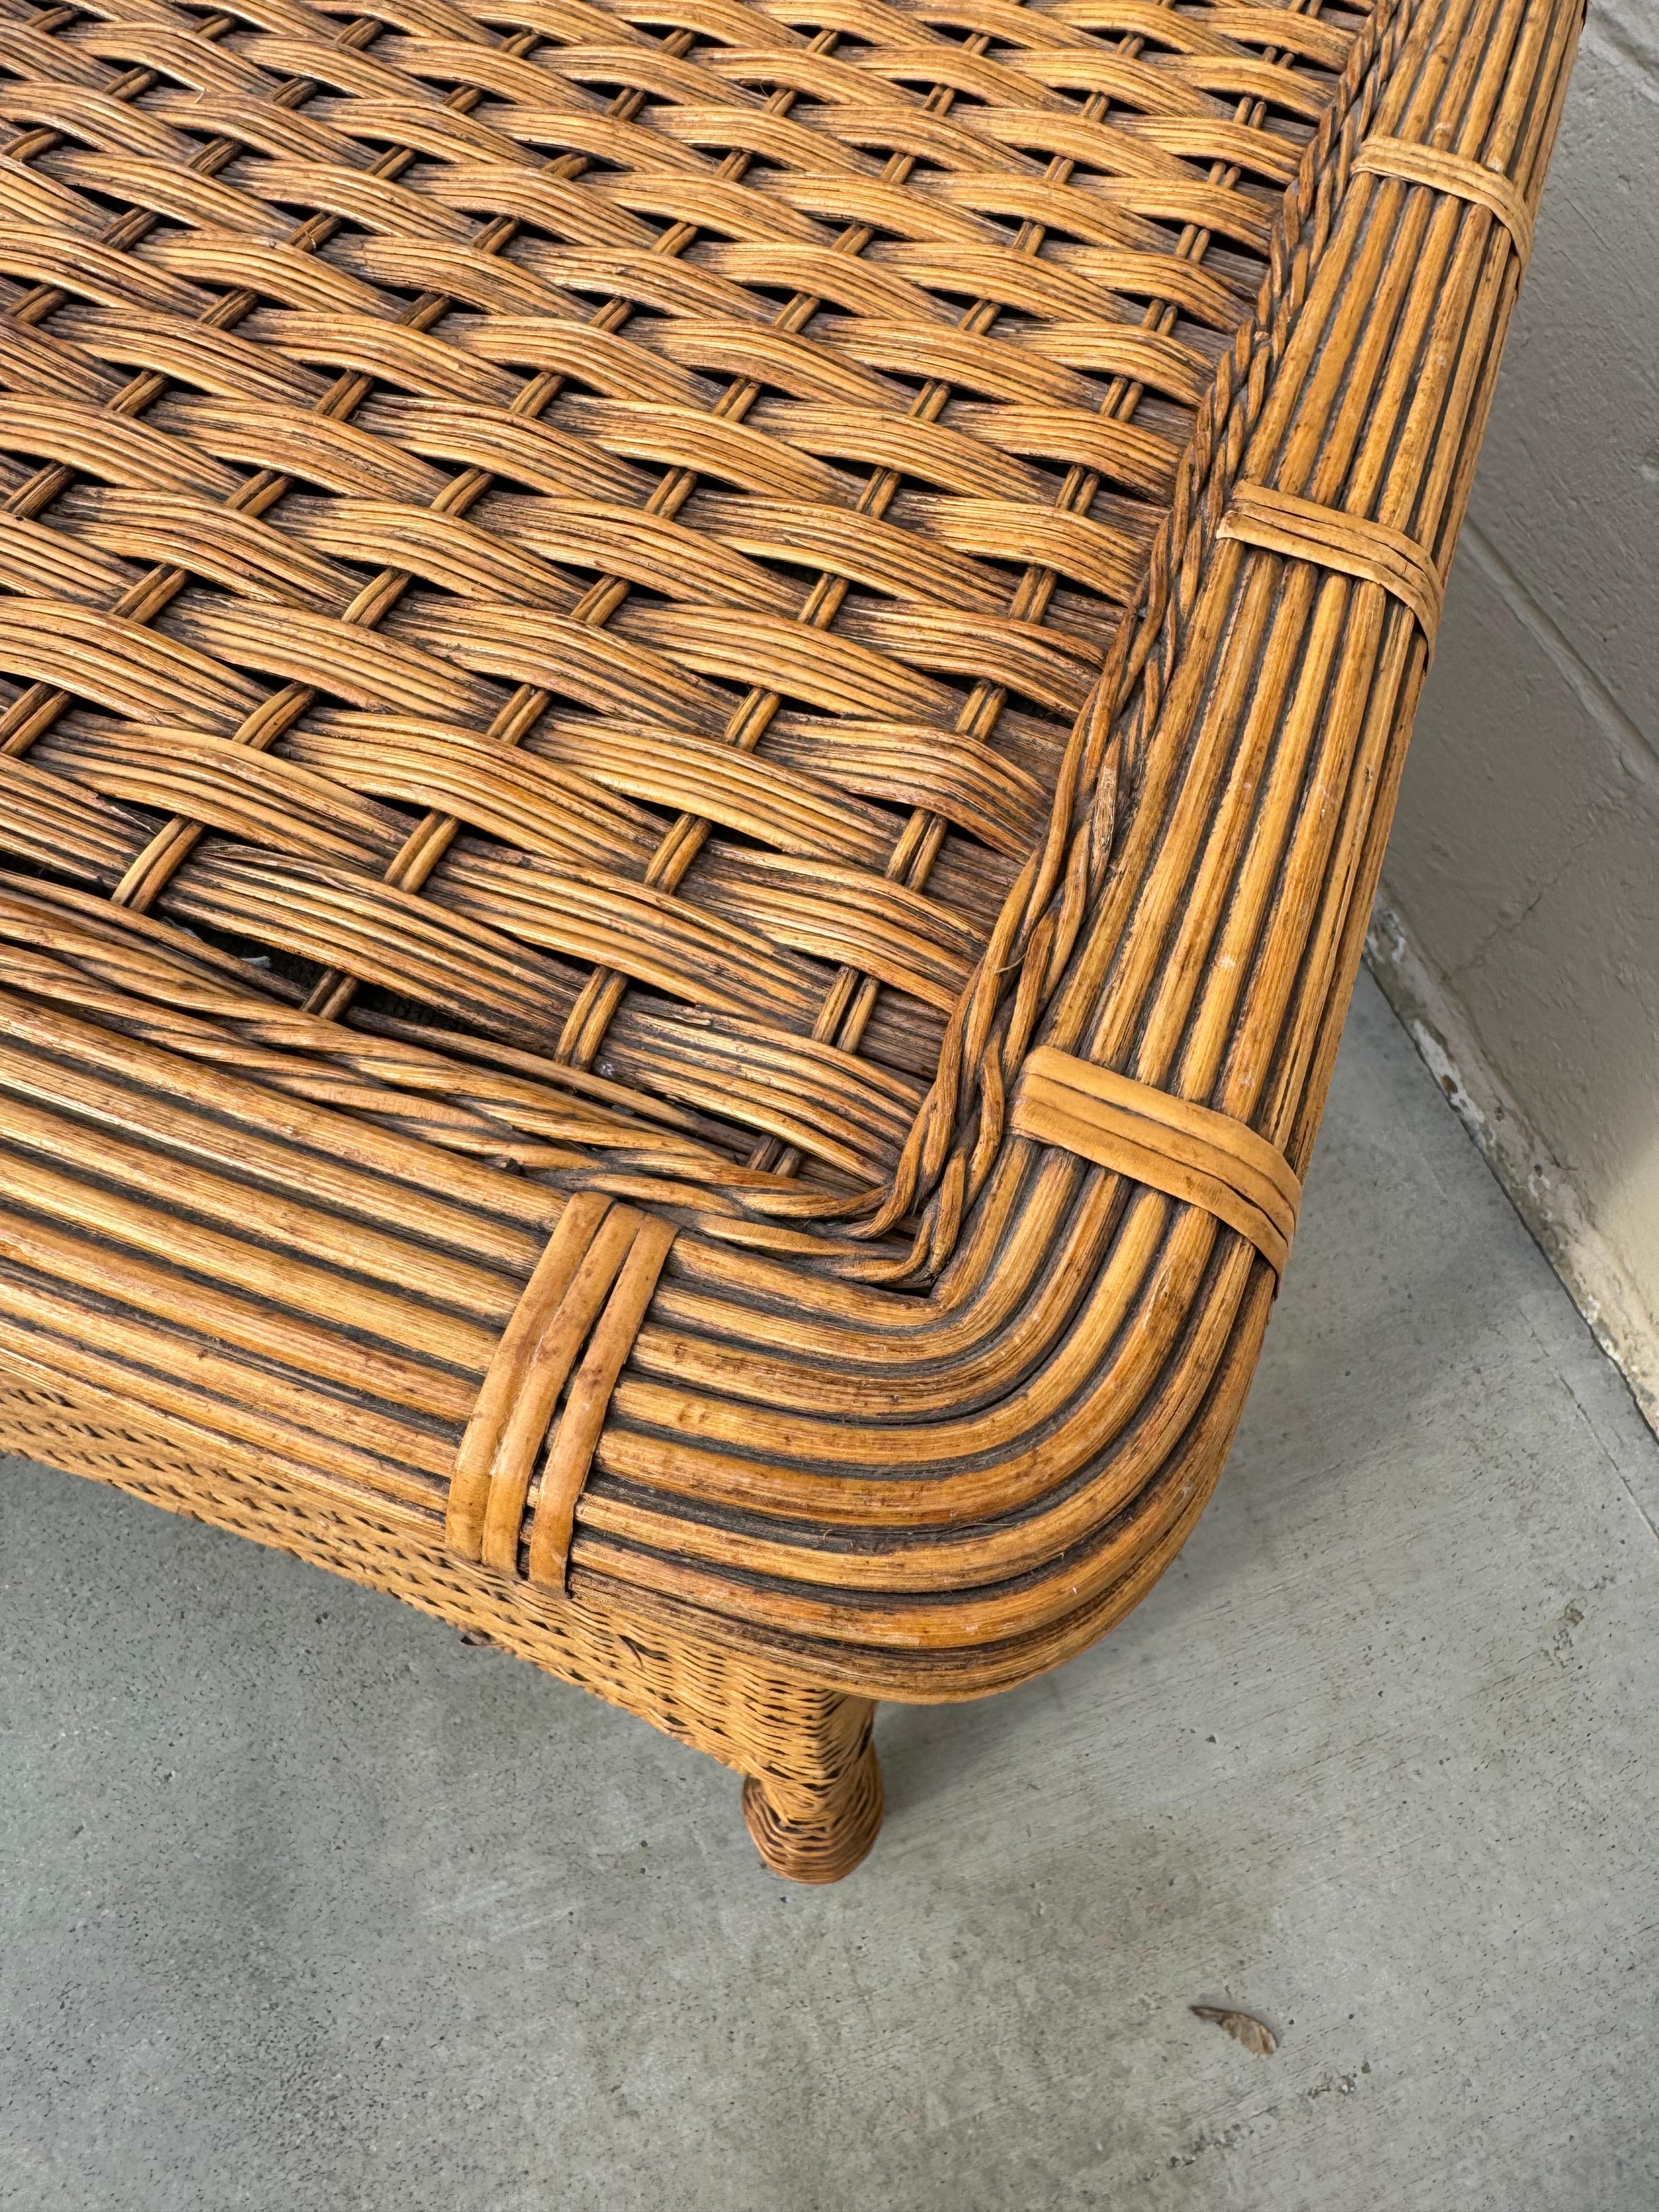 Late 20th Century 1970's Boho Chic Wicker or Rattan Table For Sale